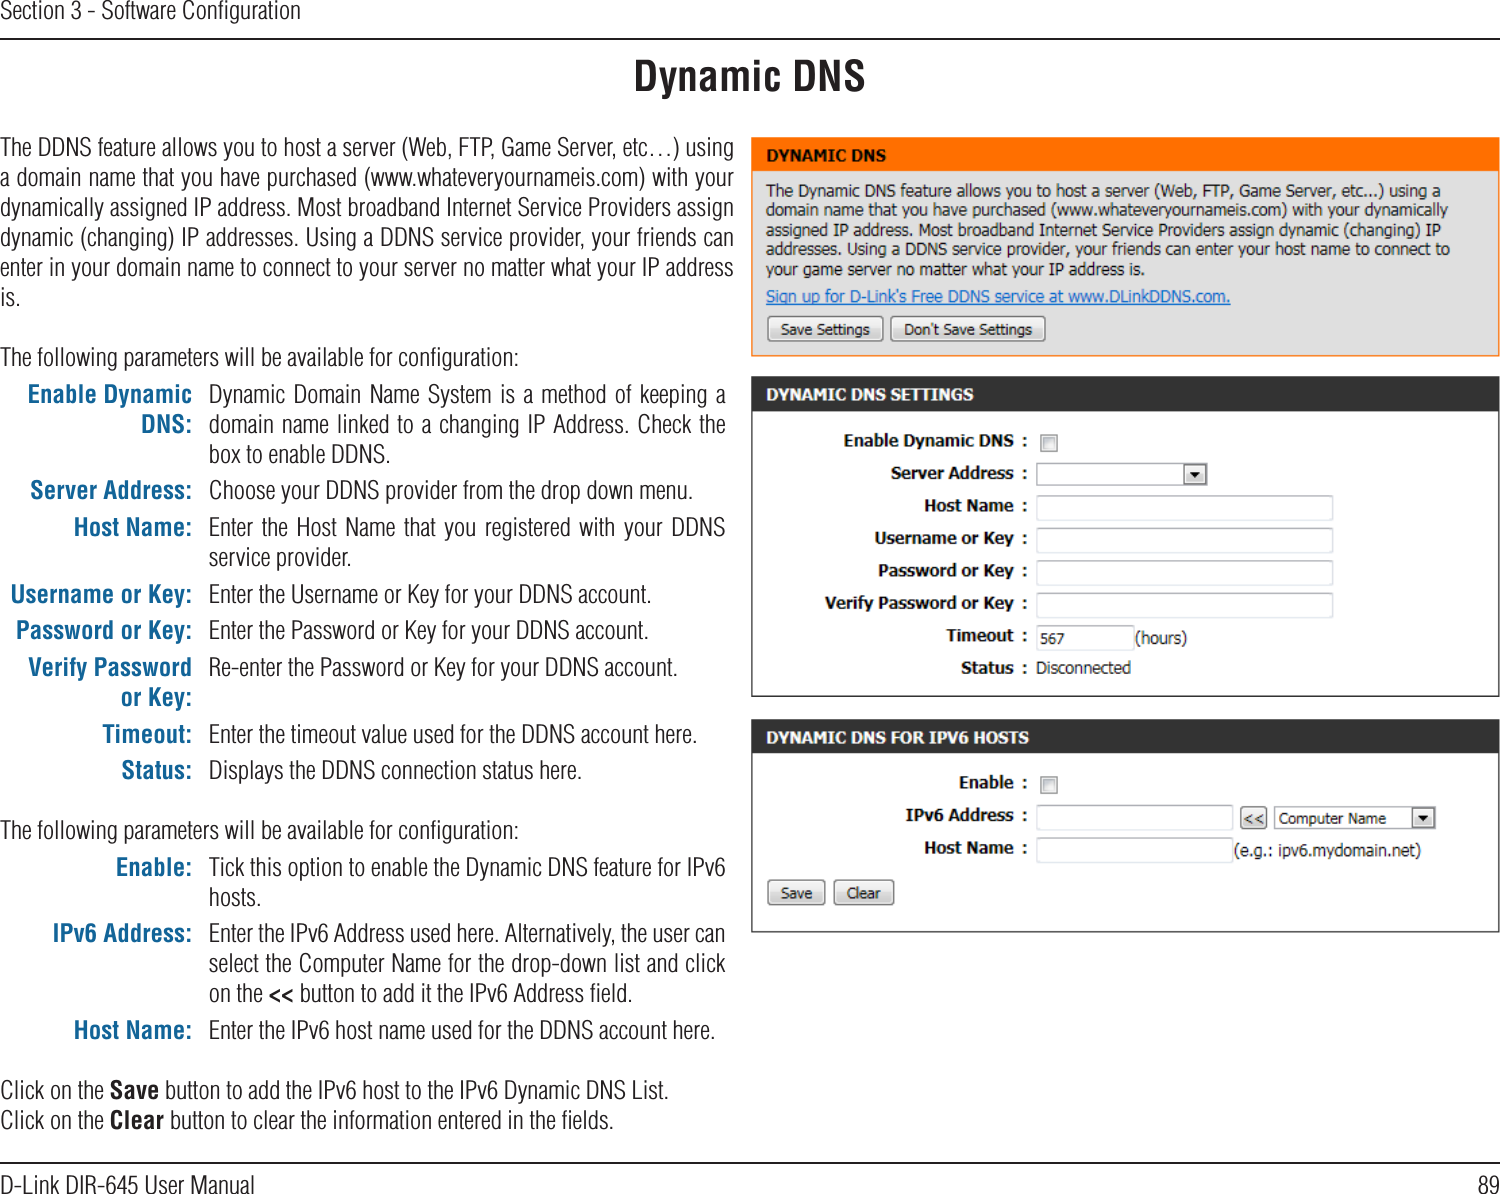 89D-Link DIR-645 User ManualSection 3 - Software ConﬁgurationDynamic DNSThe DDNS feature allows you to host a server (Web, FTP, Game Server, etc…) using a domain name that you have purchased (www.whateveryournameis.com) with your dynamically assigned IP address. Most broadband Internet Service Providers assign dynamic (changing) IP addresses. Using a DDNS service provider, your friends can enter in your domain name to connect to your server no matter what your IP address is.The following parameters will be available for conﬁguration:Enable Dynamic DNS:Dynamic Domain Name System is a  method of keeping  a domain name linked to a changing IP Address. Check the box to enable DDNS.Server Address: Choose your DDNS provider from the drop down menu.Host Name: Enter  the  Host Name that  you  registered  with  your  DDNS service provider.Username or Key: Enter the Username or Key for your DDNS account.Password or Key: Enter the Password or Key for your DDNS account.Verify Password or Key:Re-enter the Password or Key for your DDNS account.Timeout: Enter the timeout value used for the DDNS account here.Status: Displays the DDNS connection status here.The following parameters will be available for conﬁguration:Enable: Tick this option to enable the Dynamic DNS feature for IPv6 hosts.IPv6 Address: Enter the IPv6 Address used here. Alternatively, the user can select the Computer Name for the drop-down list and click on the &lt;&lt; button to add it the IPv6 Address ﬁeld.Host Name: Enter the IPv6 host name used for the DDNS account here.Click on the Save button to add the IPv6 host to the IPv6 Dynamic DNS List.Click on the Clear button to clear the information entered in the ﬁelds.